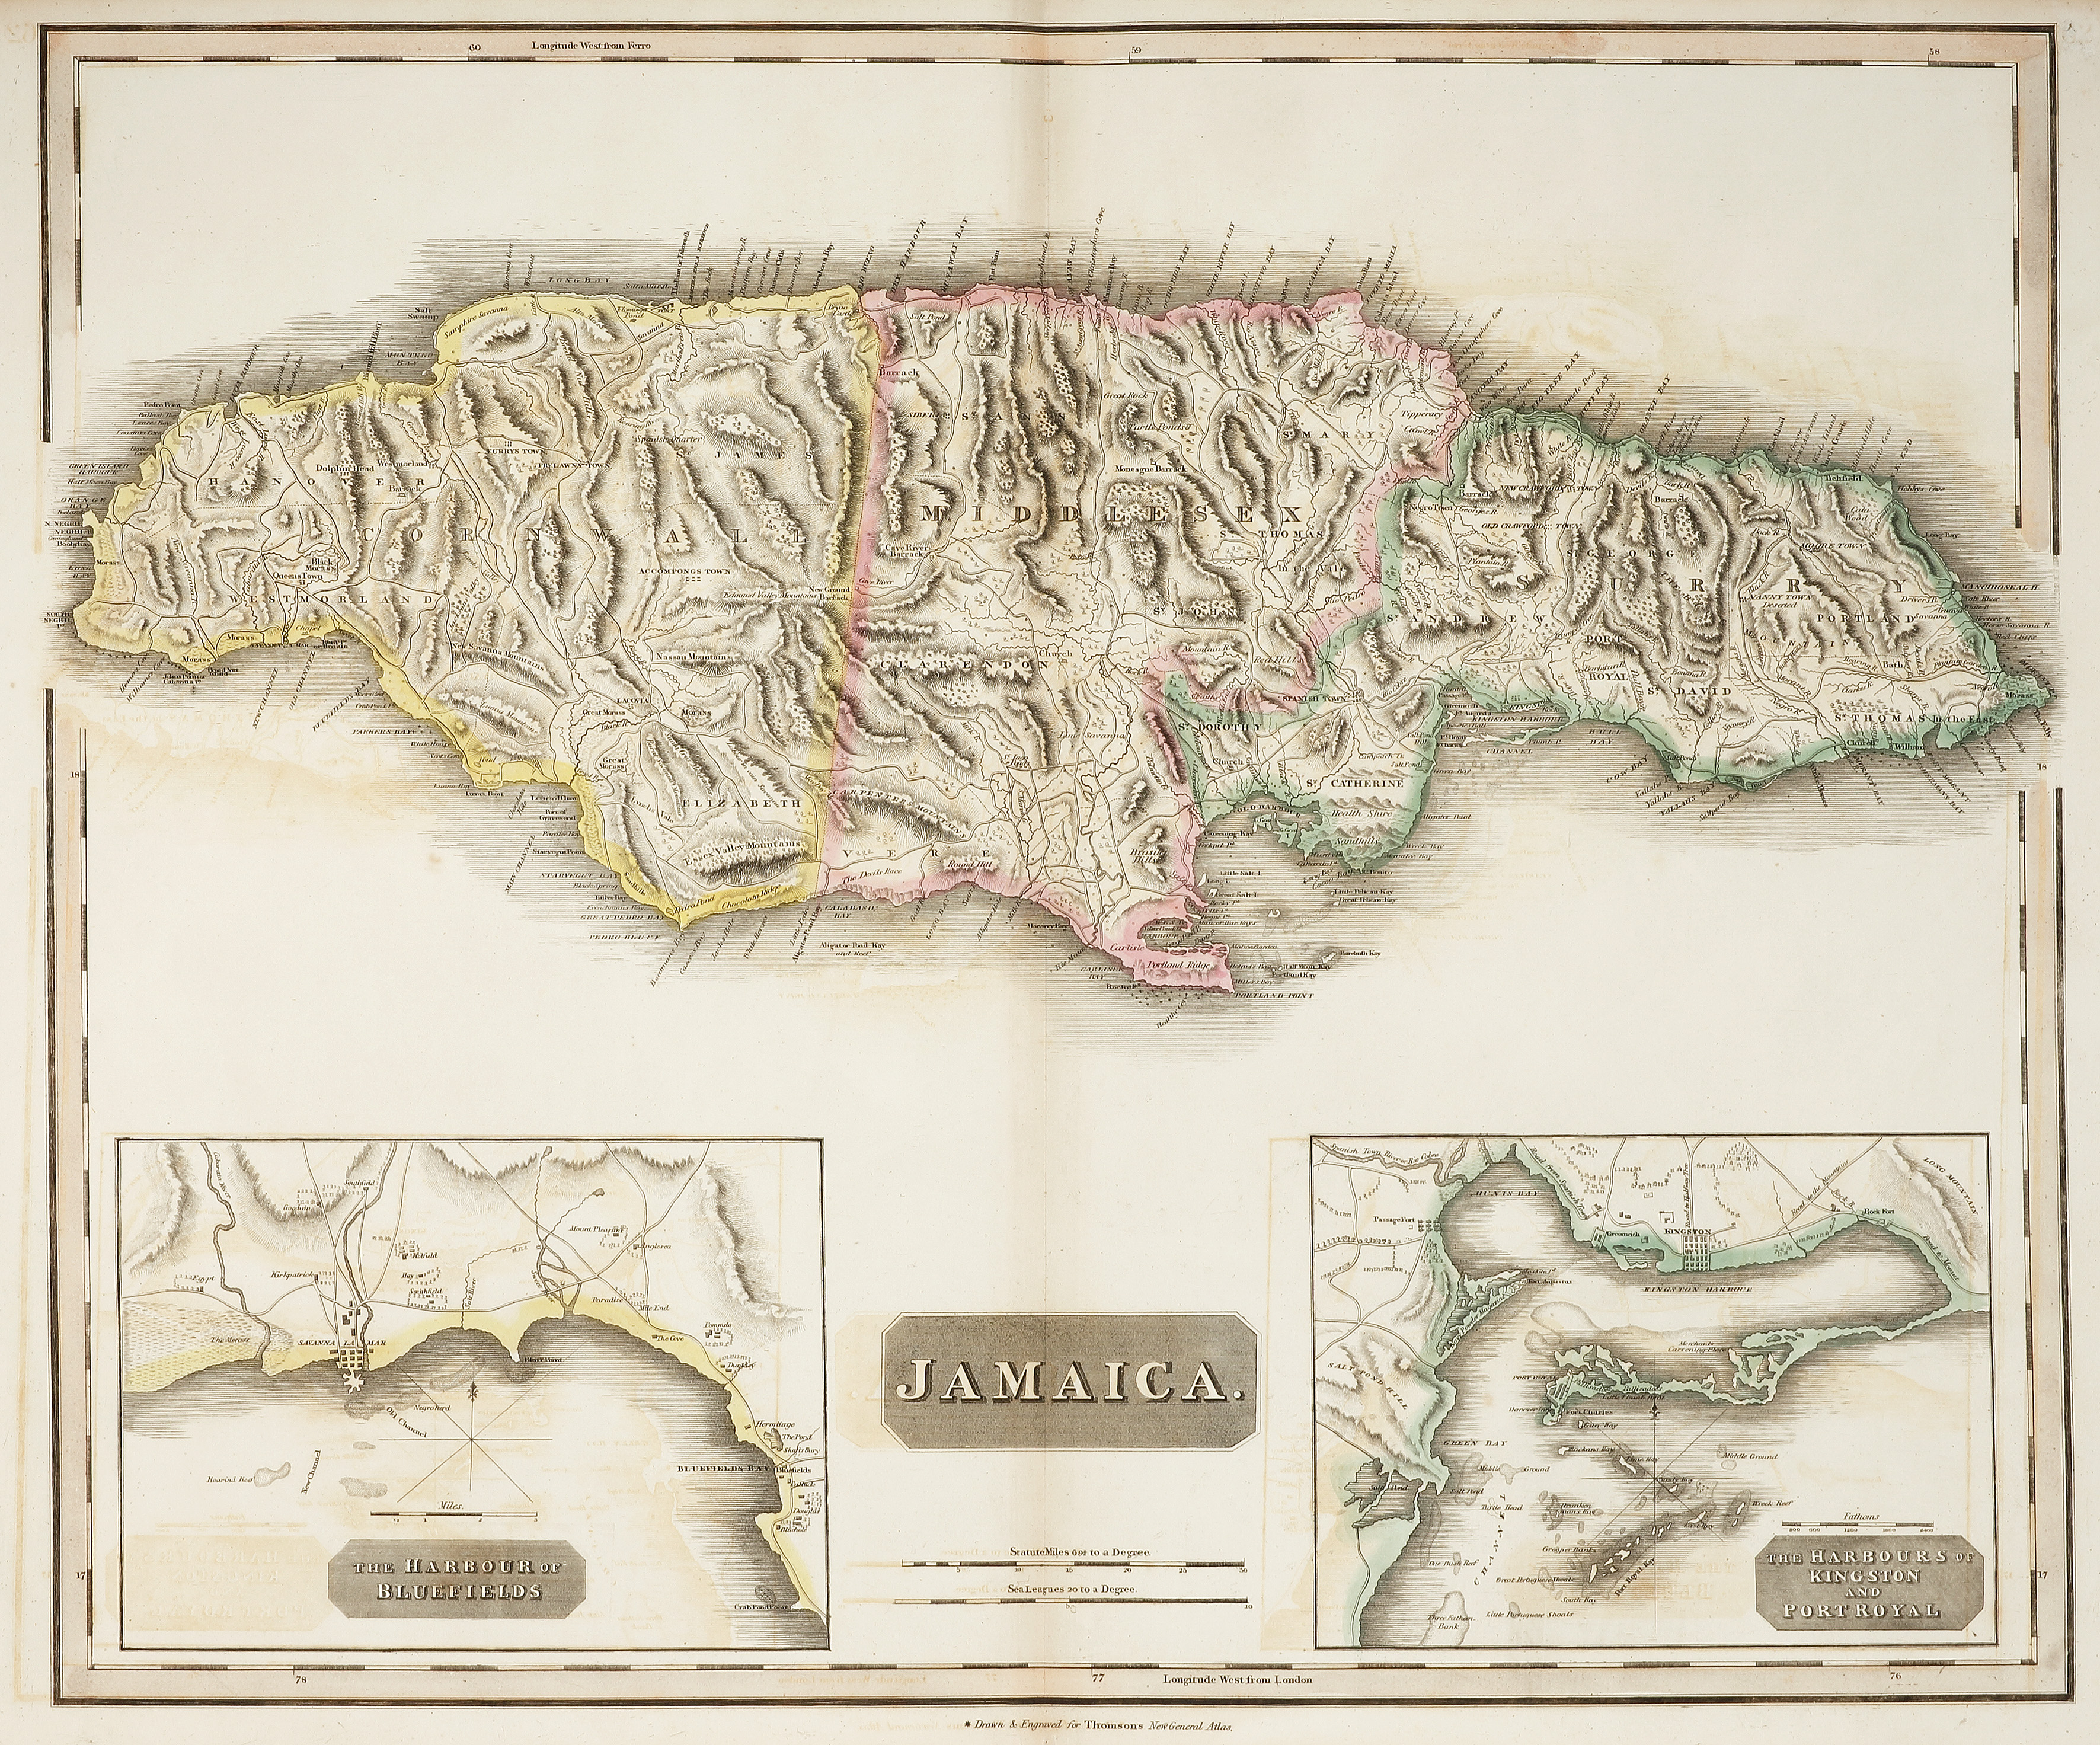 Jamaica - Antique Map from 1817